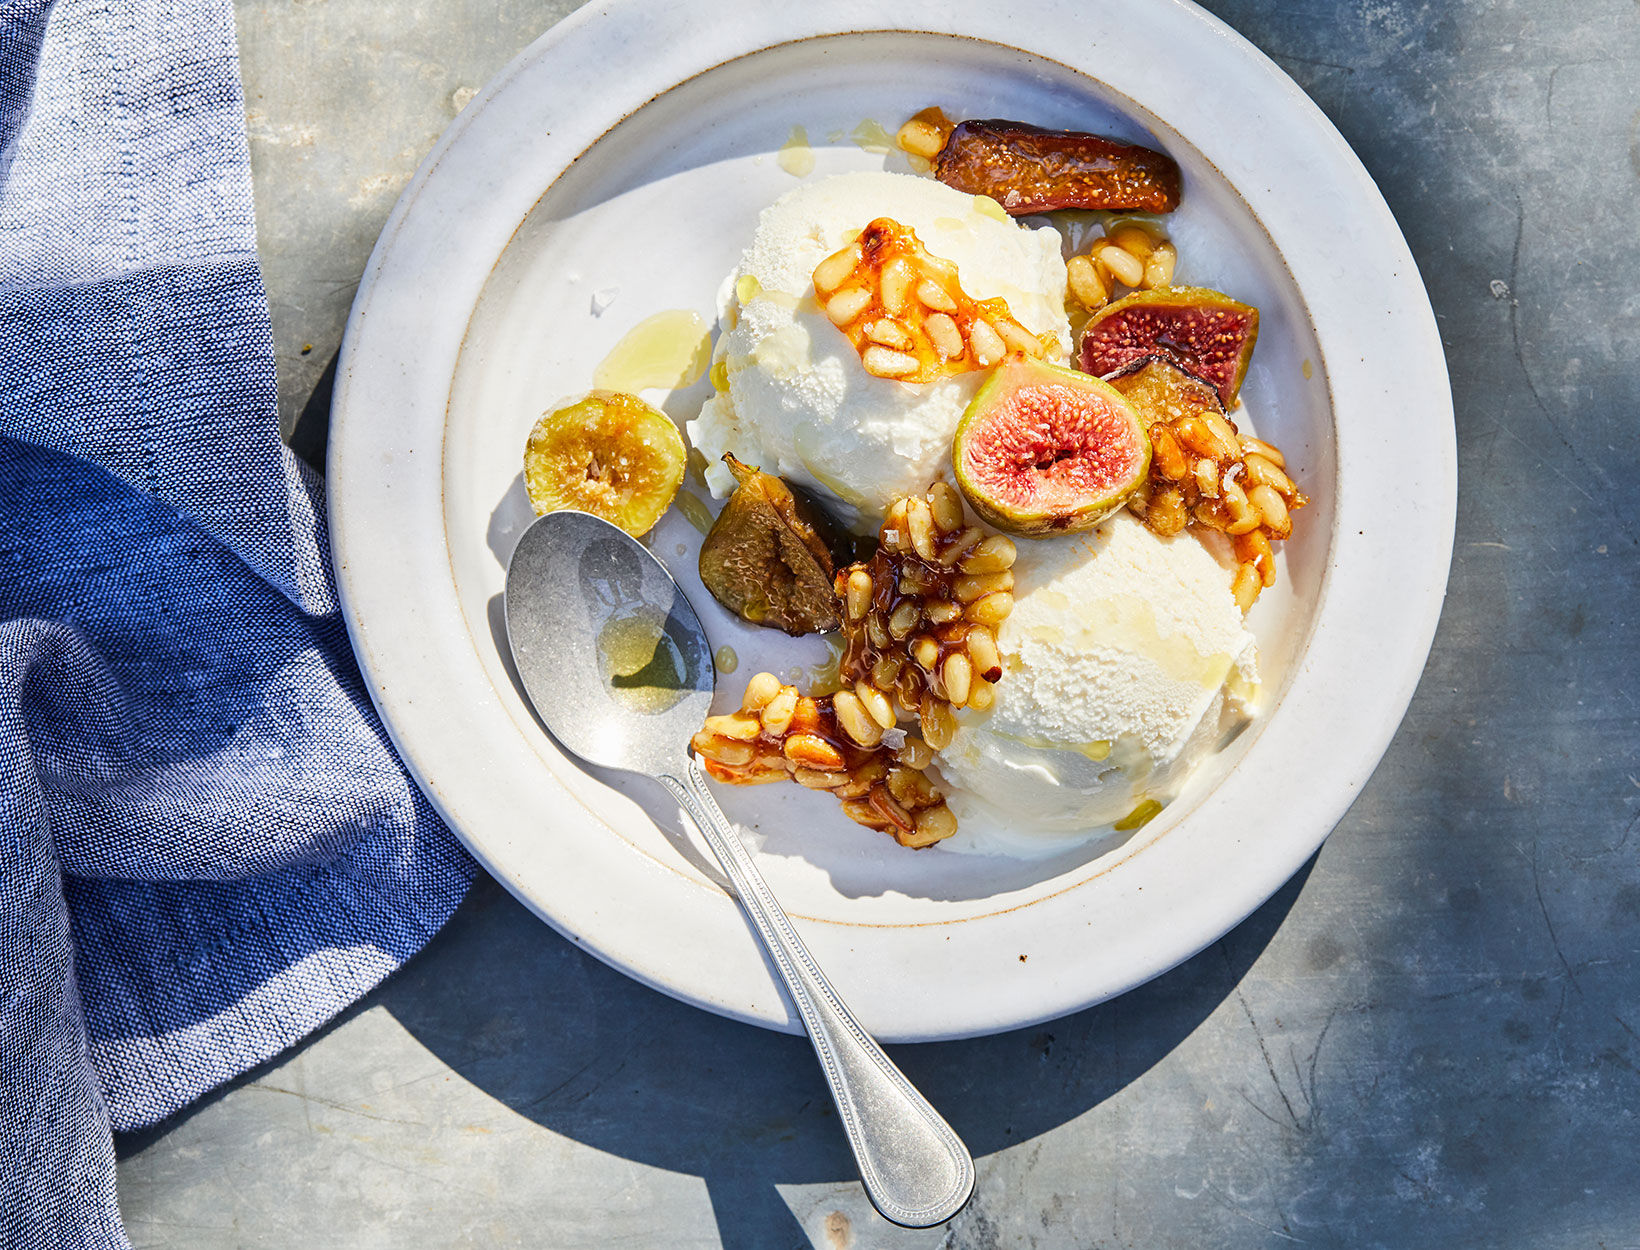 Roasted Figs with Candied Pine Nuts and Vanilla Ice Cream